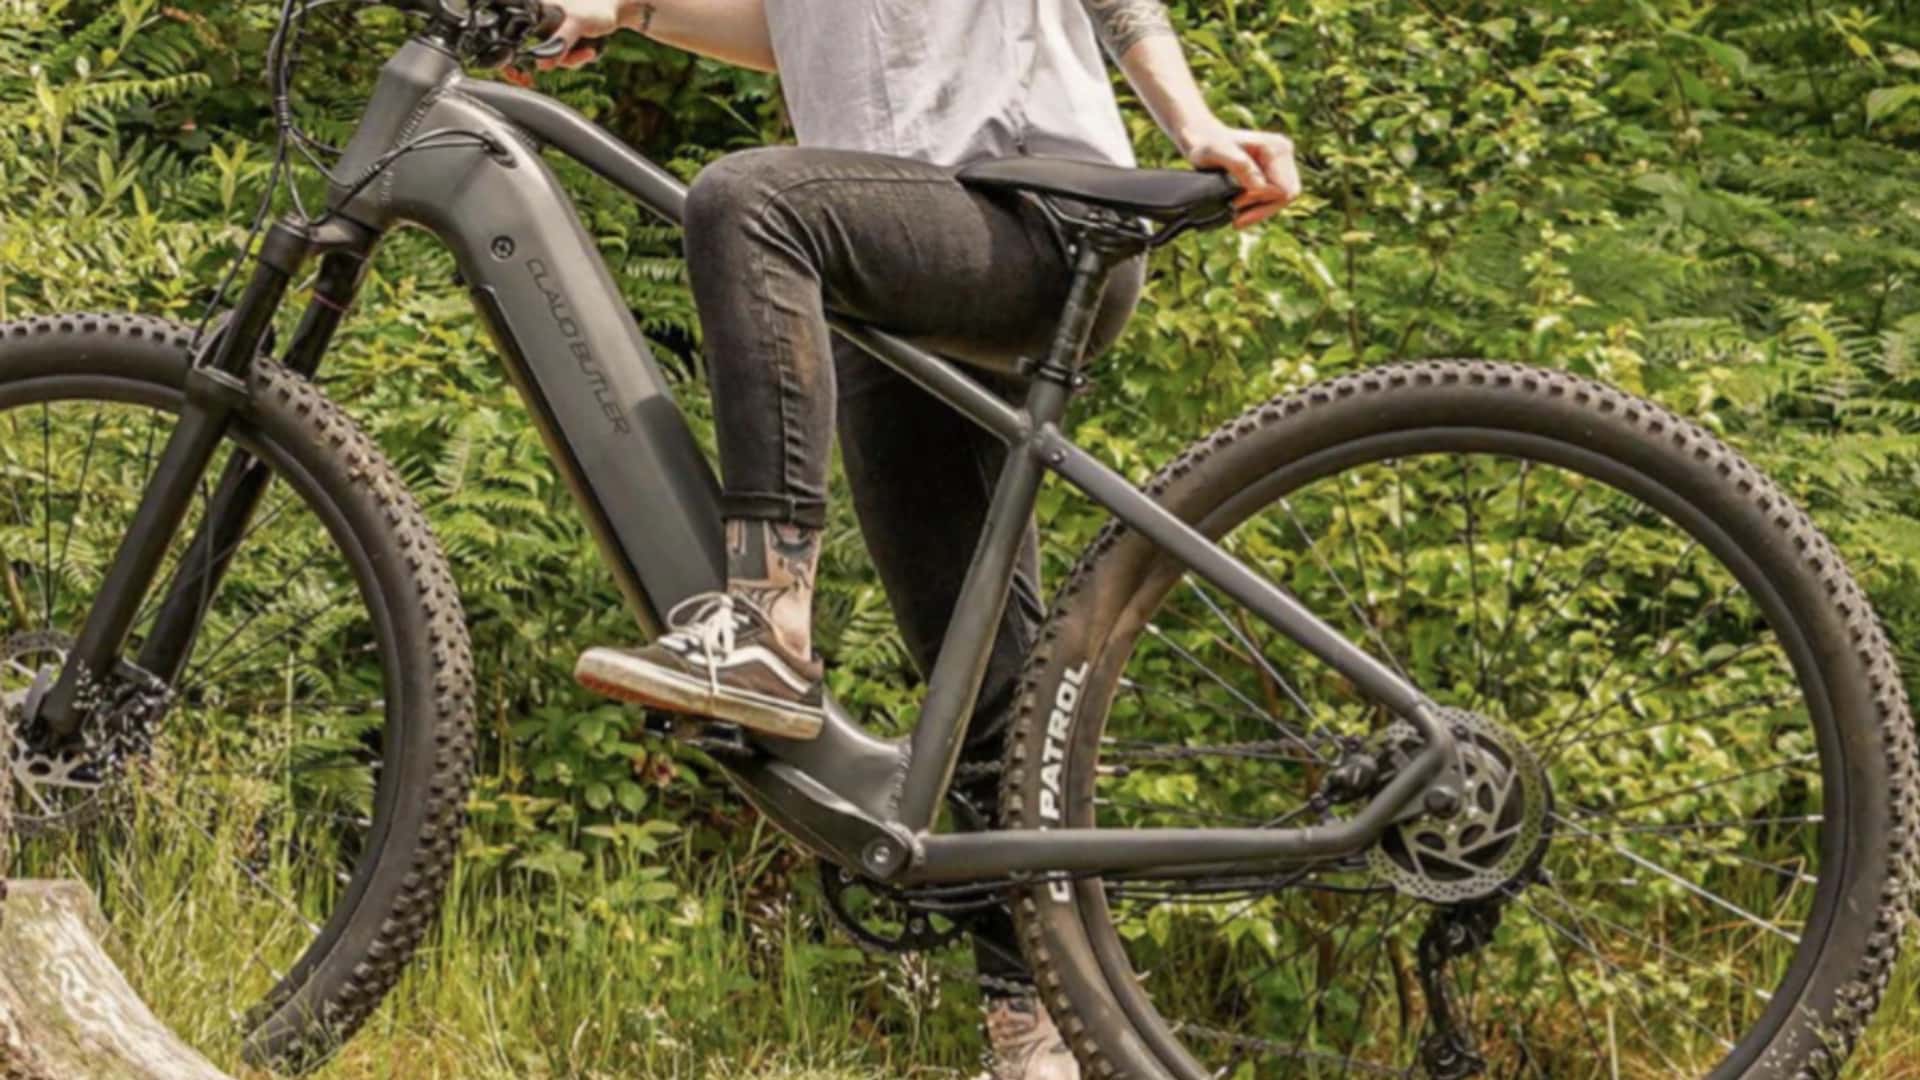 e-bike specialist claud butler releases two affordable e-mtbs